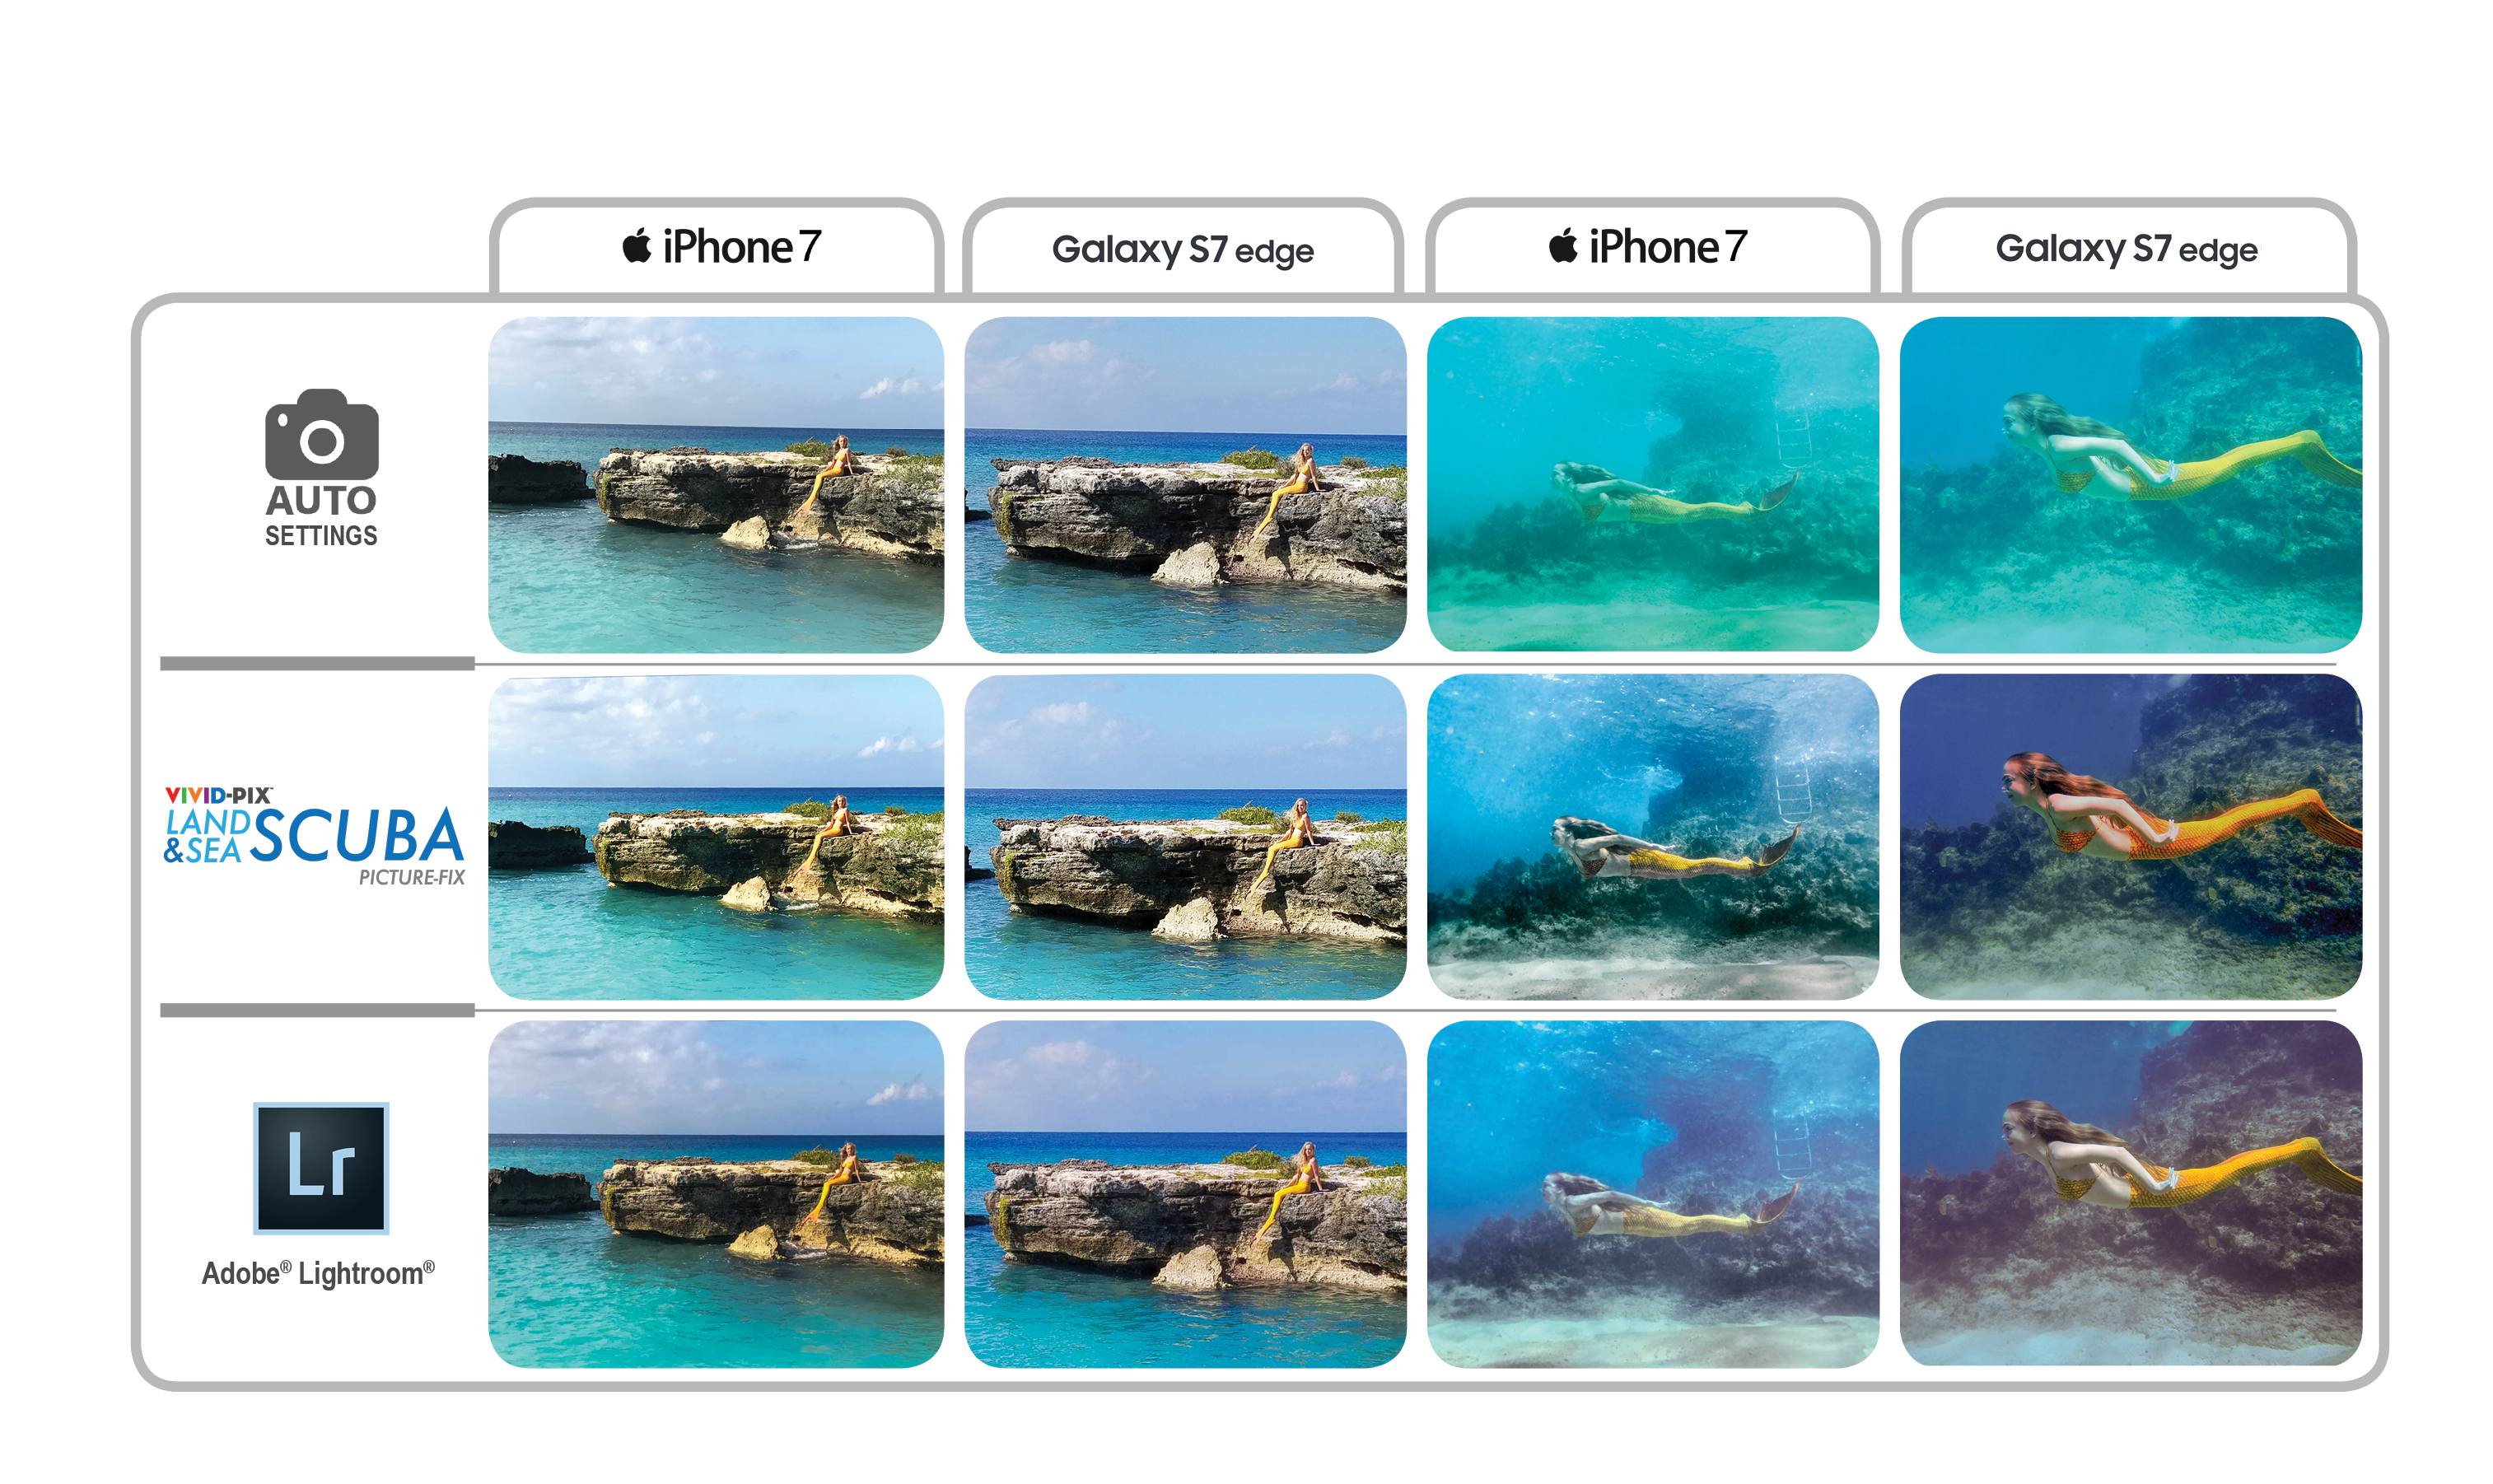 The article provides comparative images that illustrate phones, cameras, and photo quality.